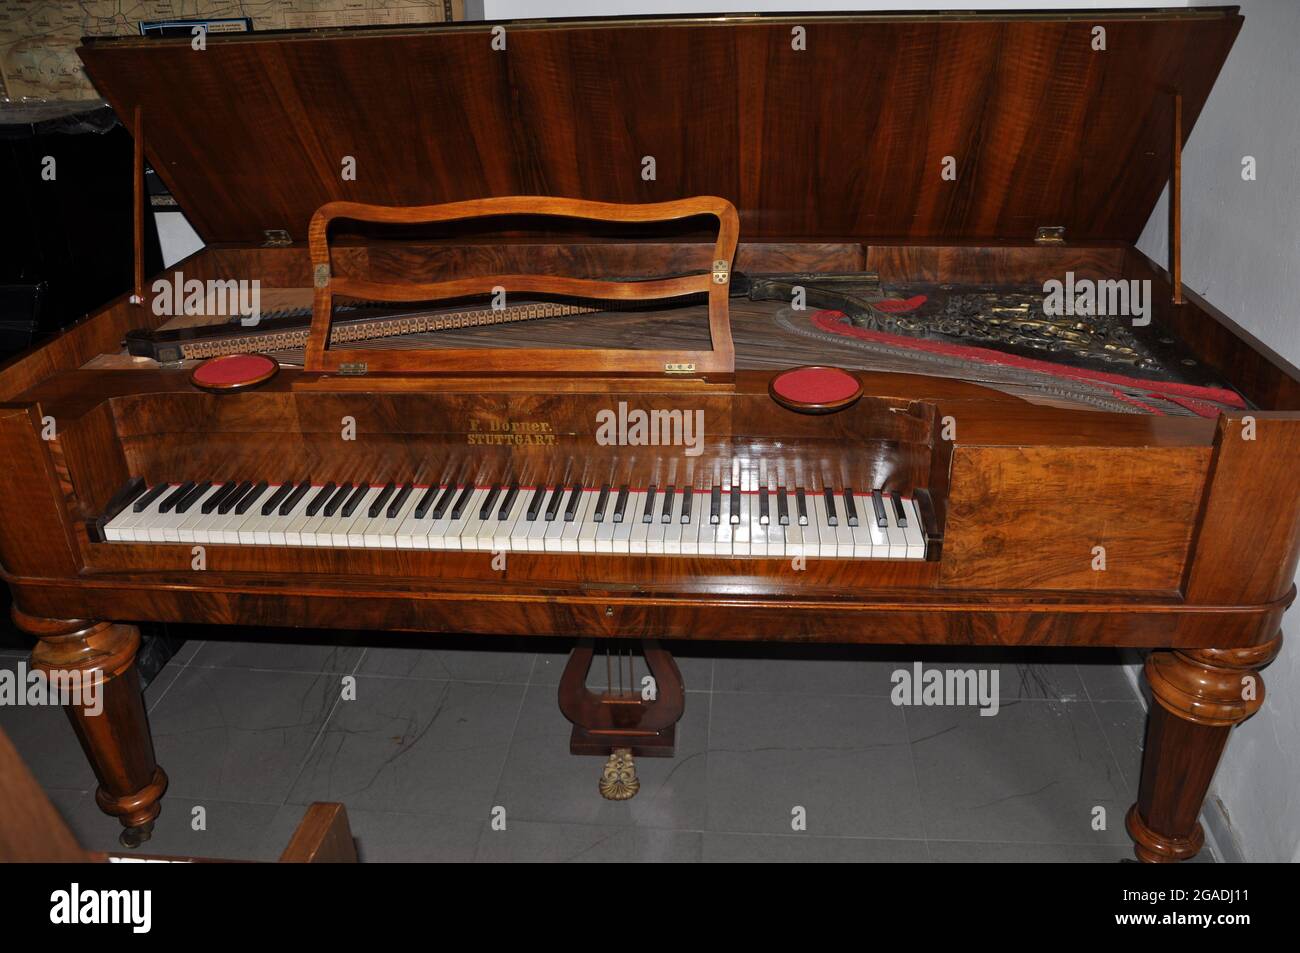 Upright Piano Isolated High Resolution Stock Photography and Images - Alamy